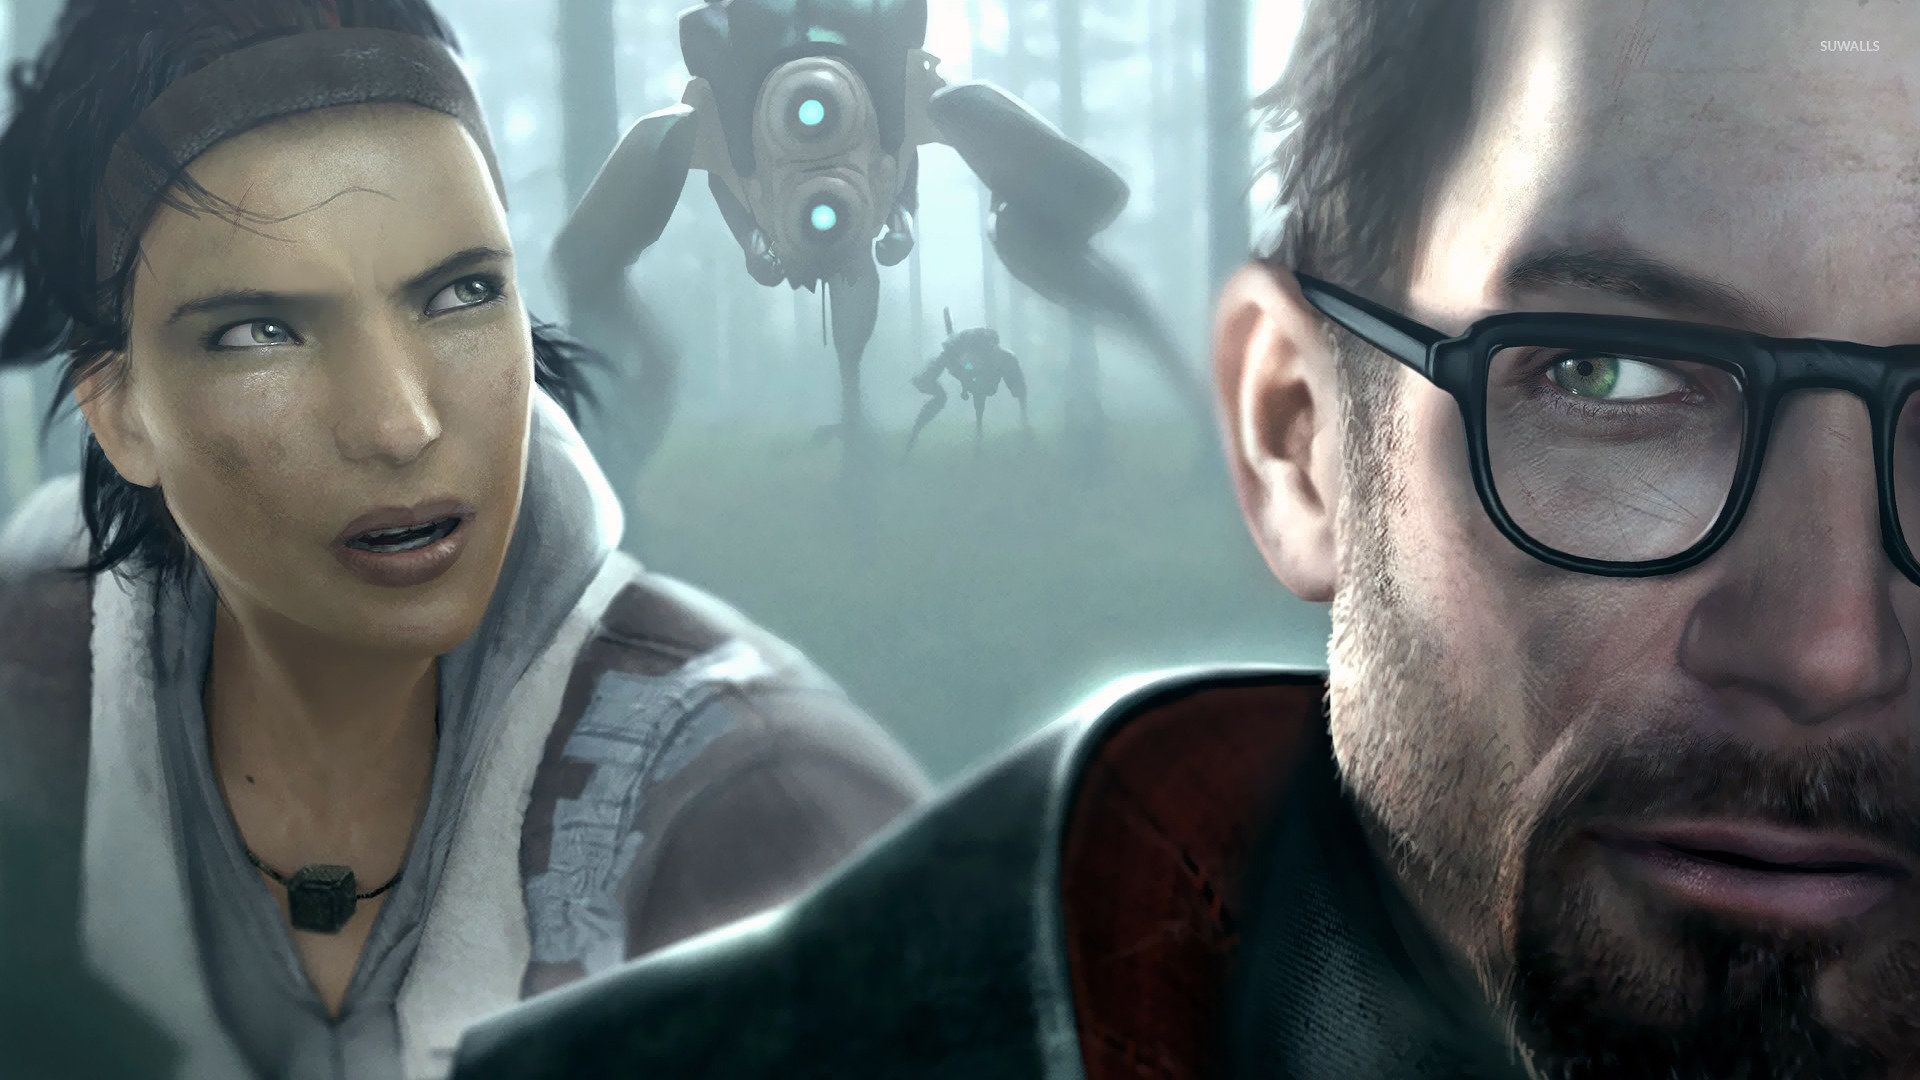 Gabe Newell: Release Half-Life 3!